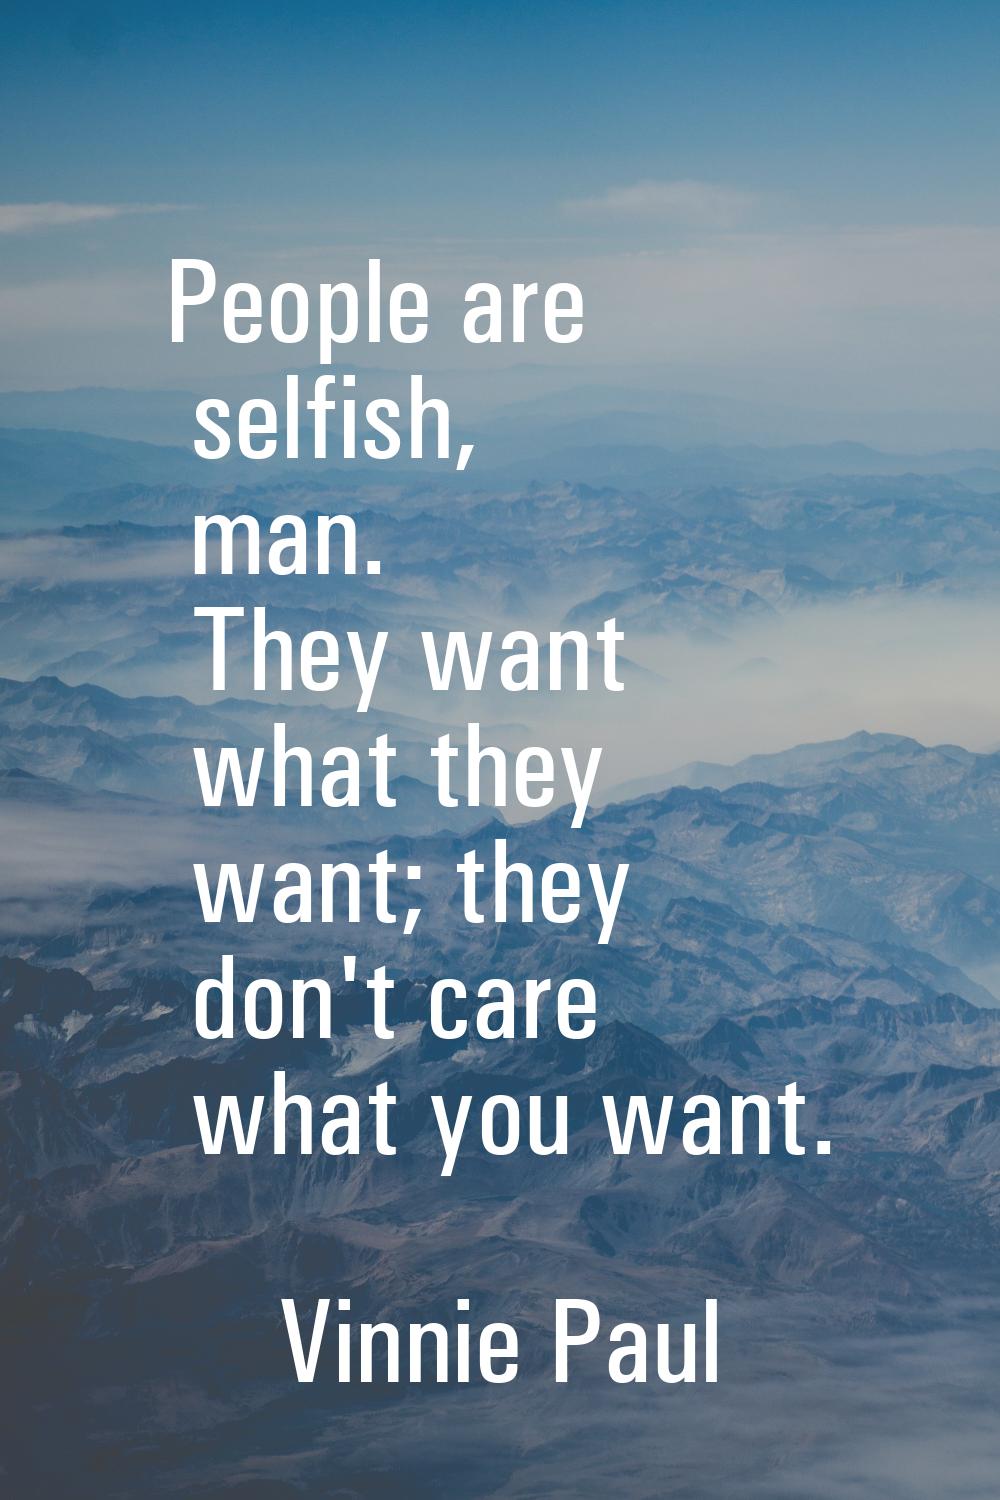 People are selfish, man. They want what they want; they don't care what you want.